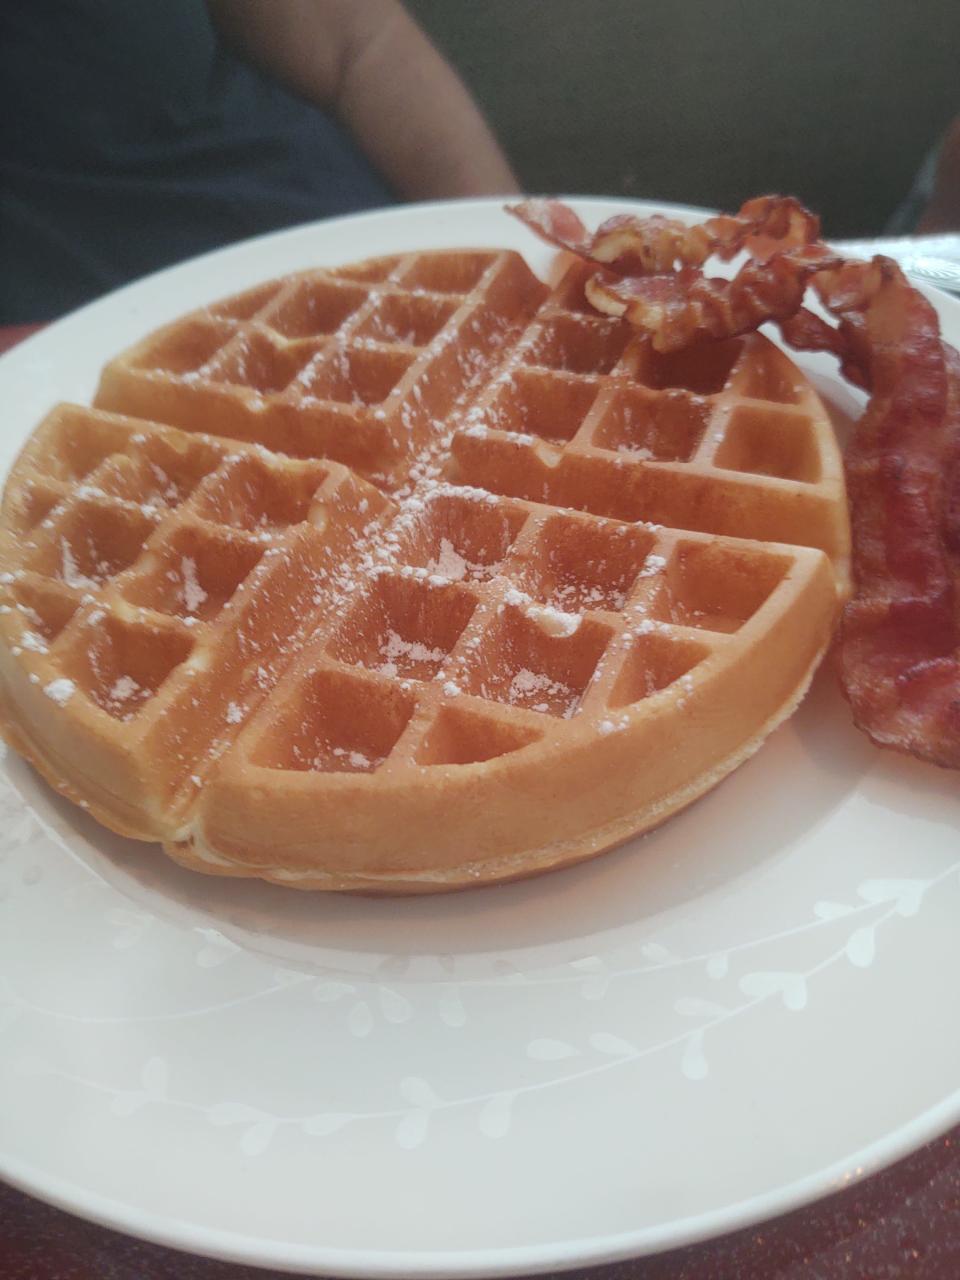 Waterfall Restaurant in Vero Beach serves hot and fluffy Belgian waffles with bacon.